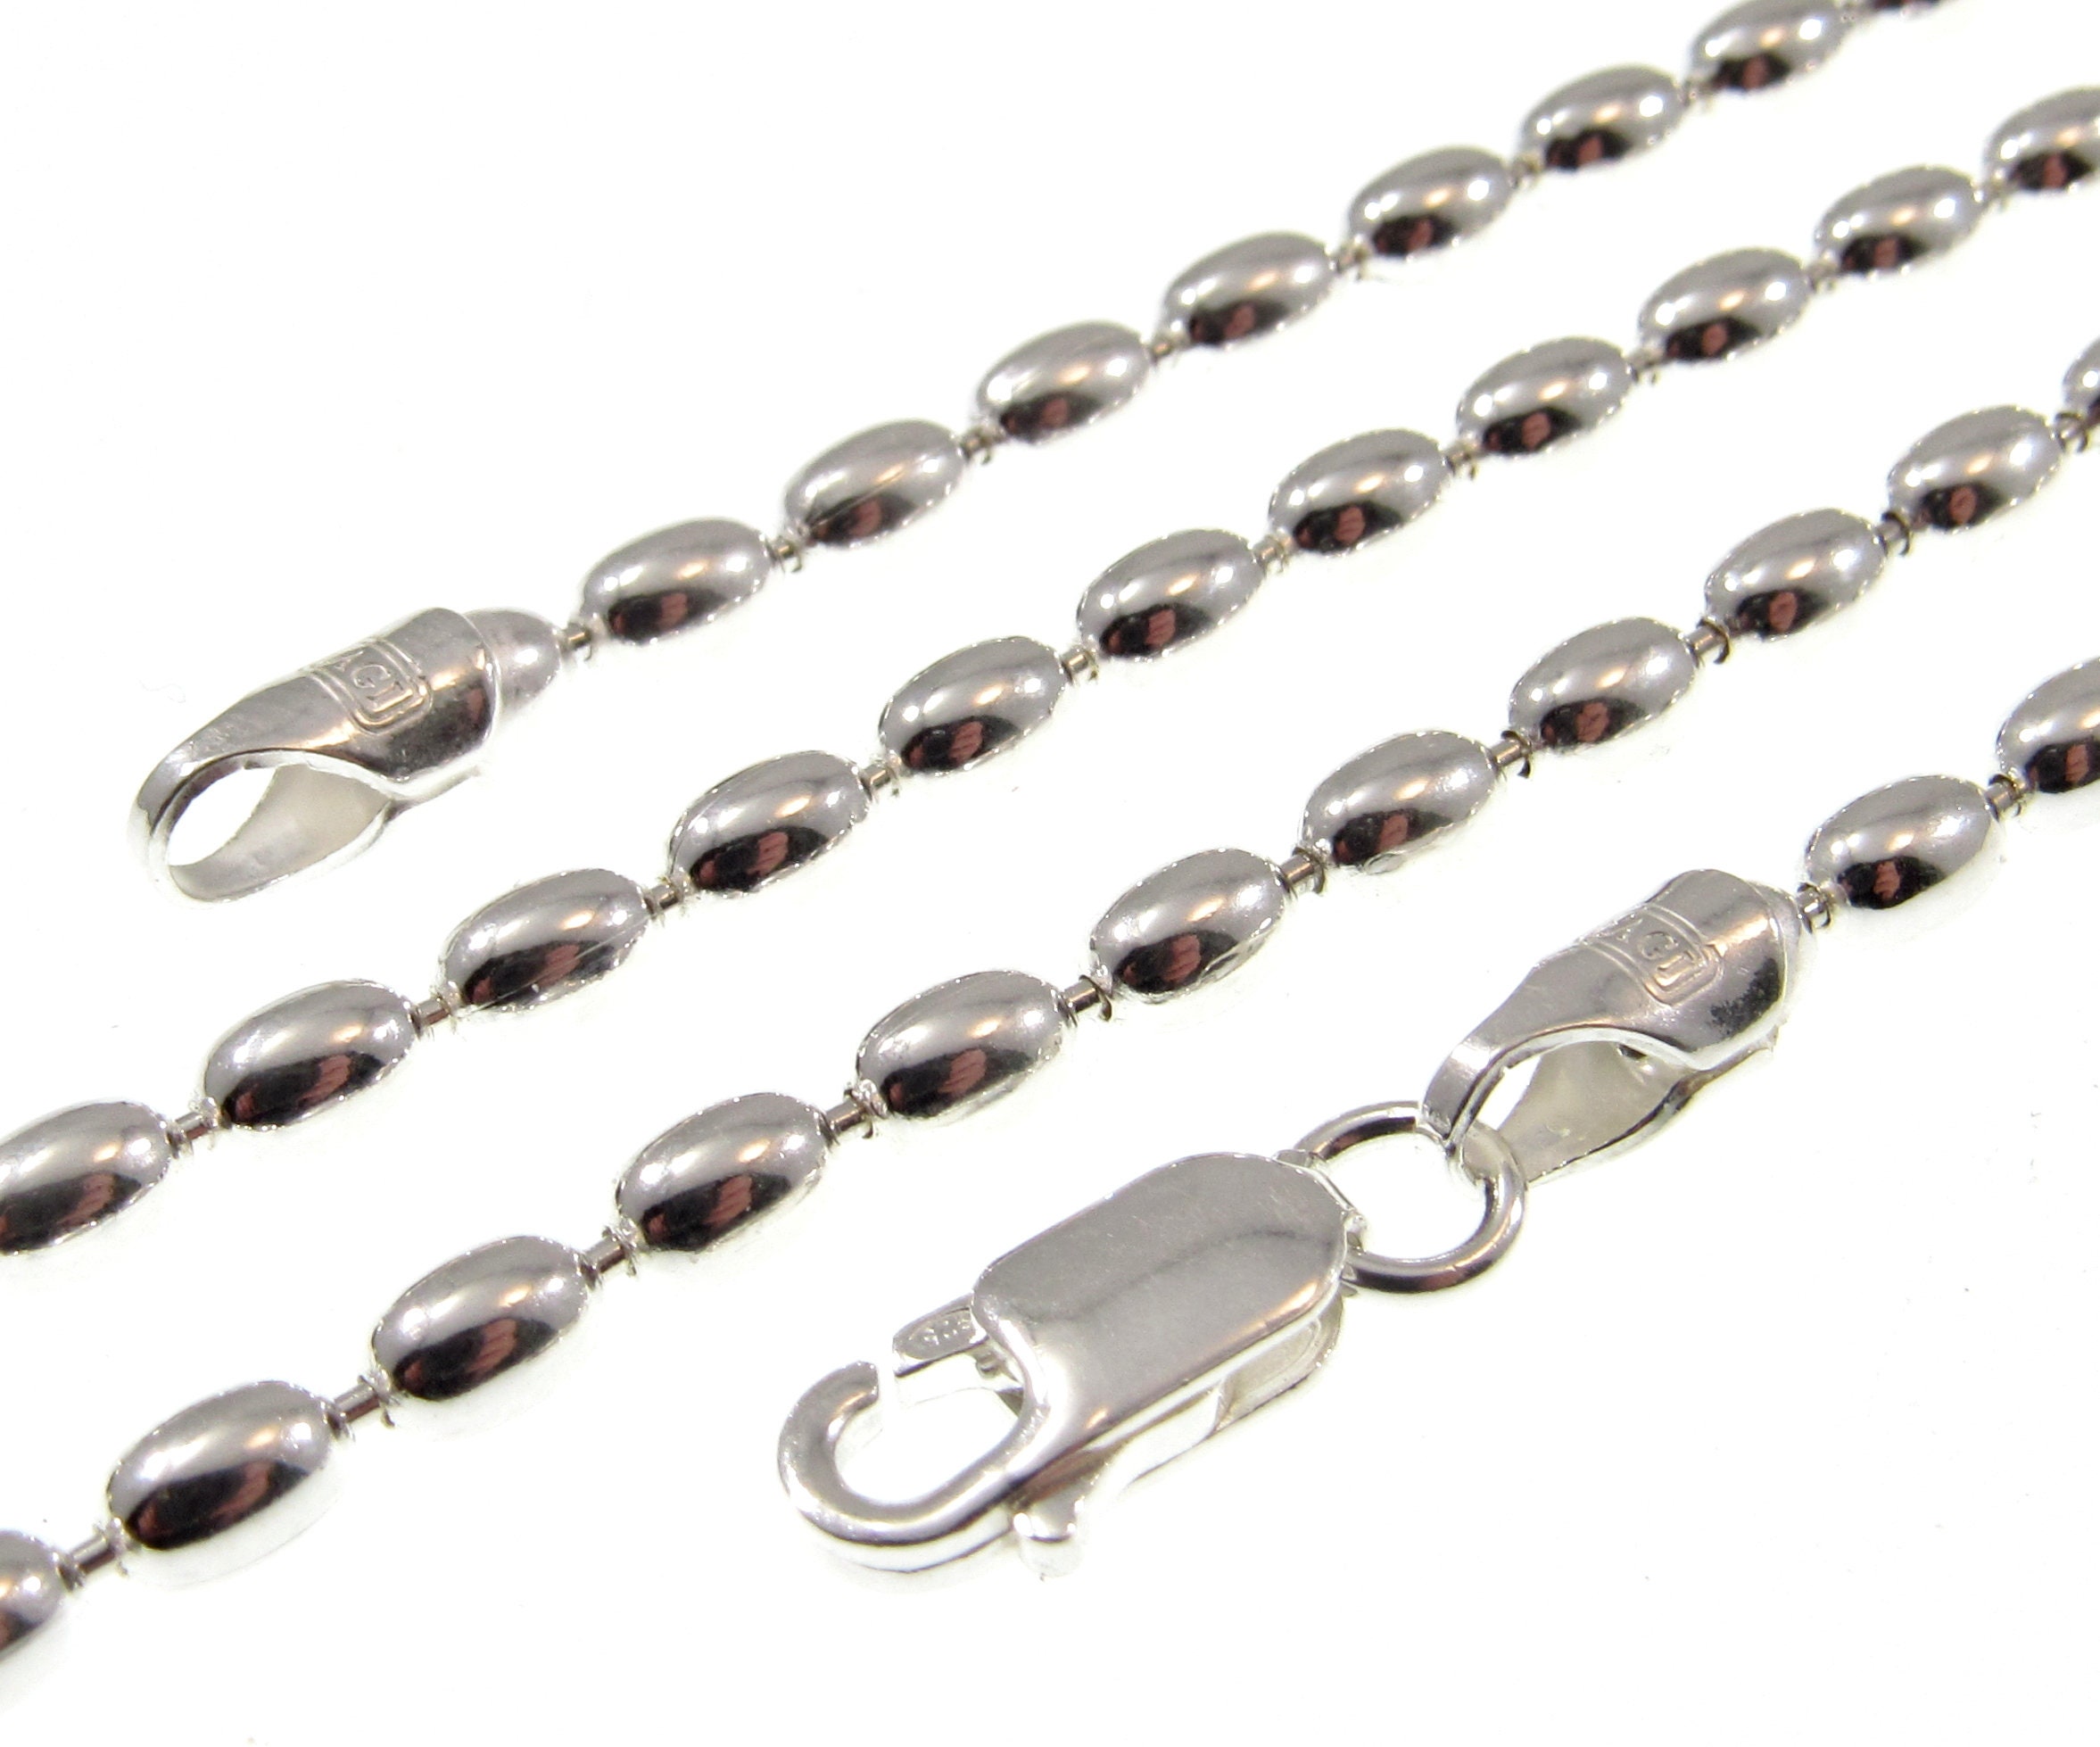 Sterling Silver Dog Tag Chain, 2mm Chain, 16-36 inch, Sterling Ball Chain, Sterling Silver Bead Chain, 925 Chain, Sterling Dog Tag Chain